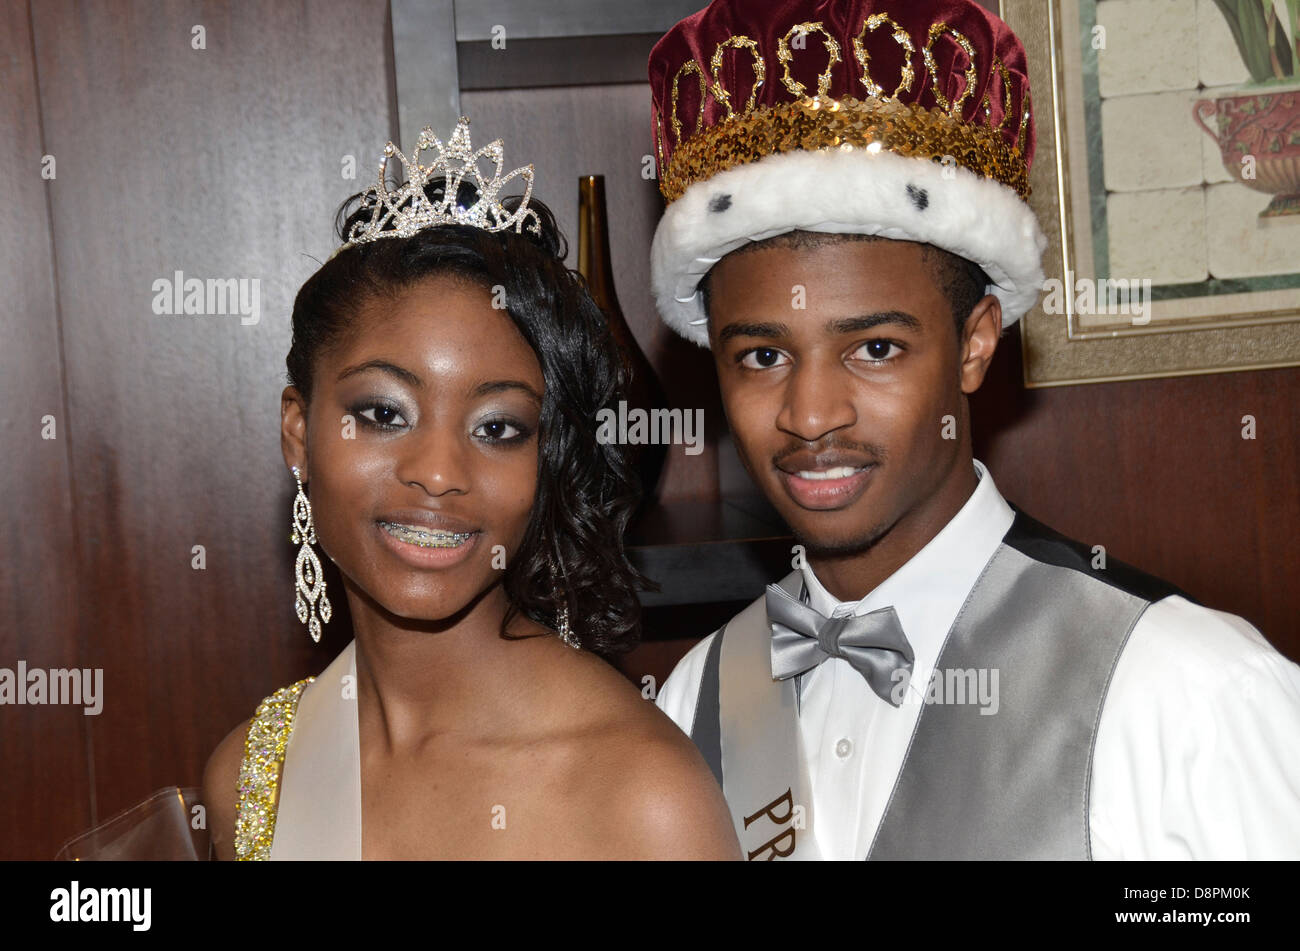 king and queen at court Stock Photo - Alamy